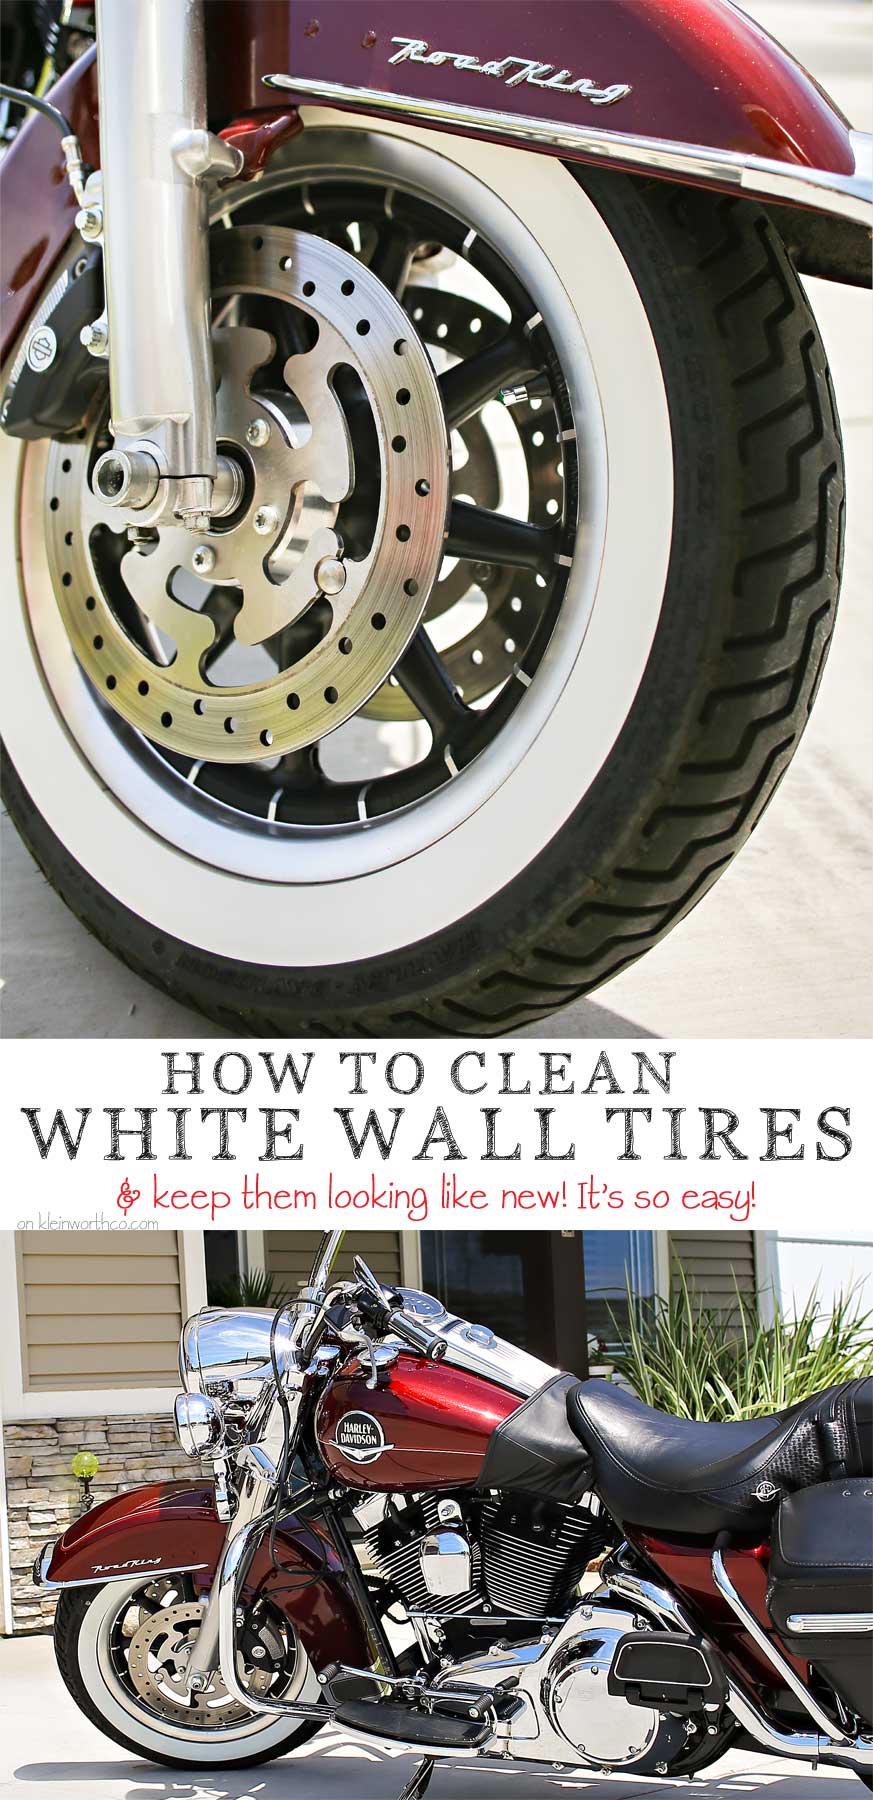 How to Clean White Wall Tires on a Motorcycle 